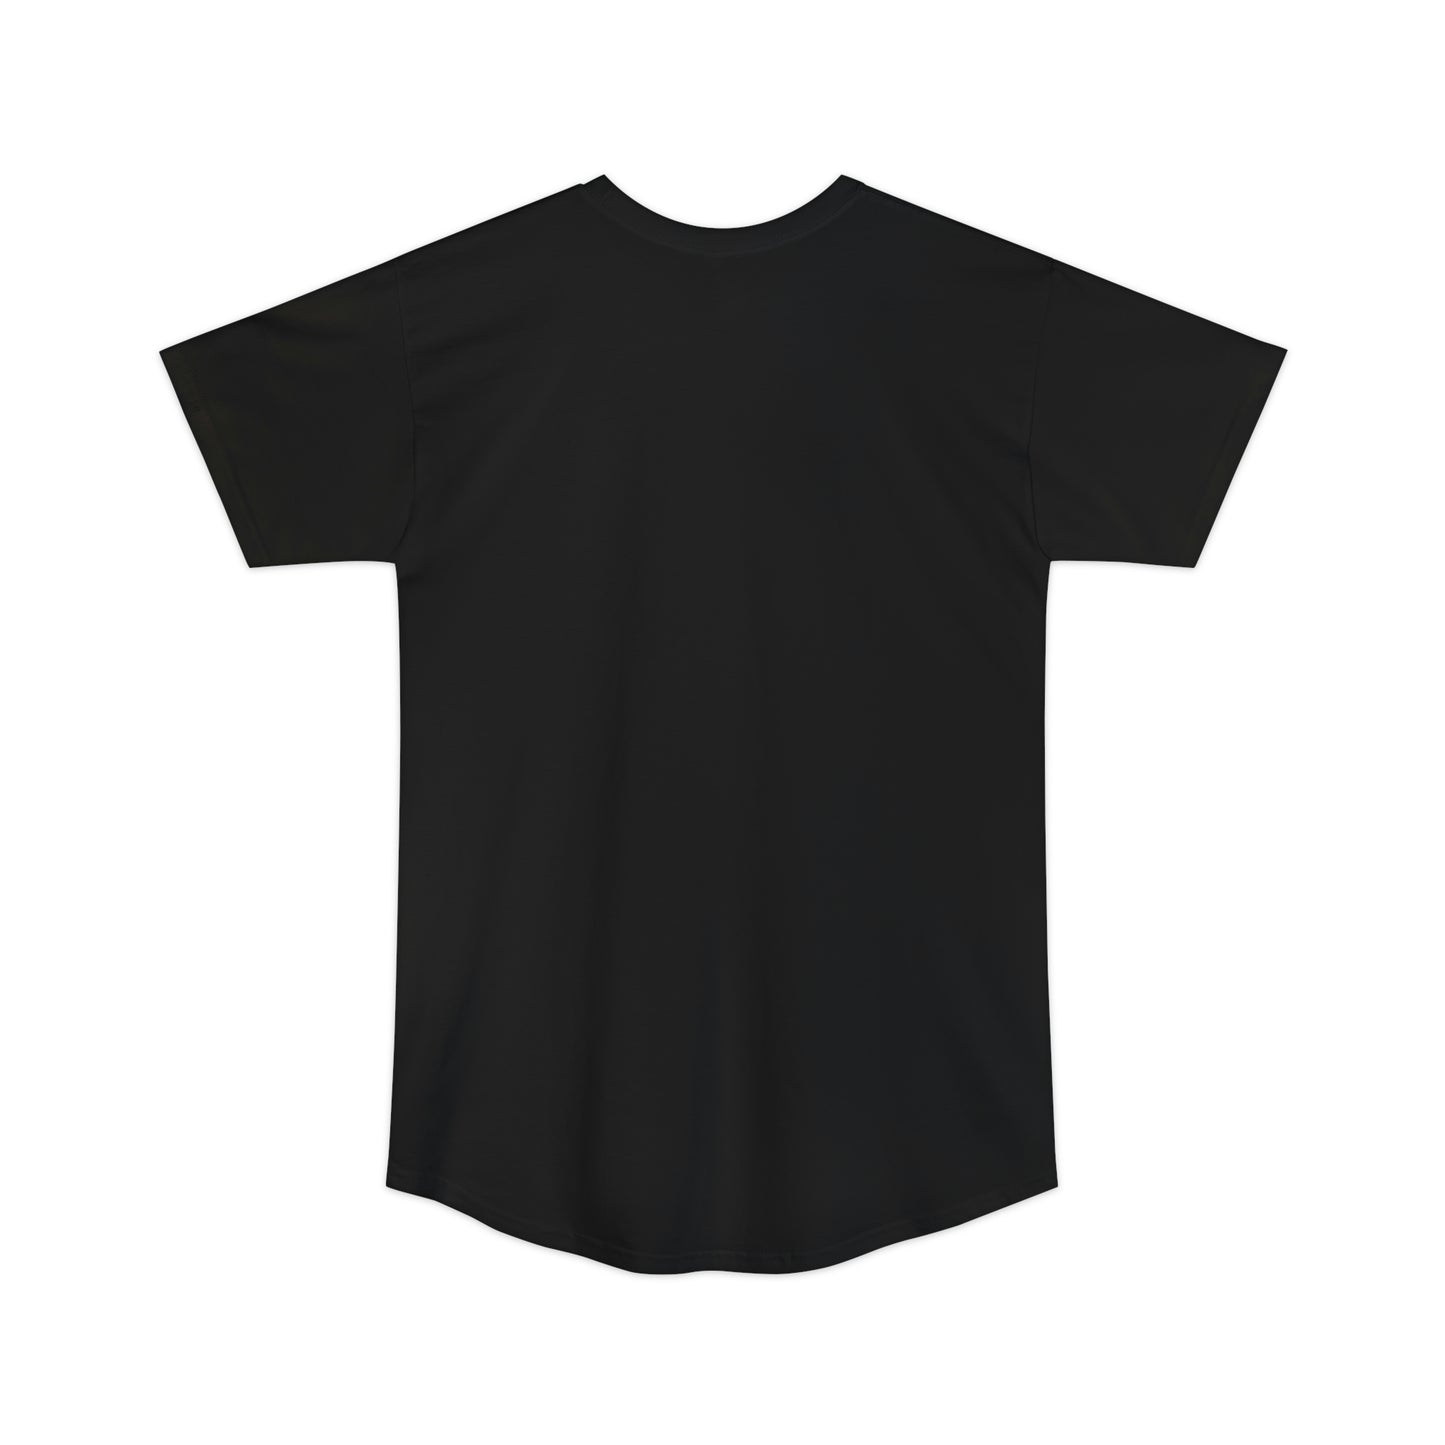 Flat back view of the Black t-shirt